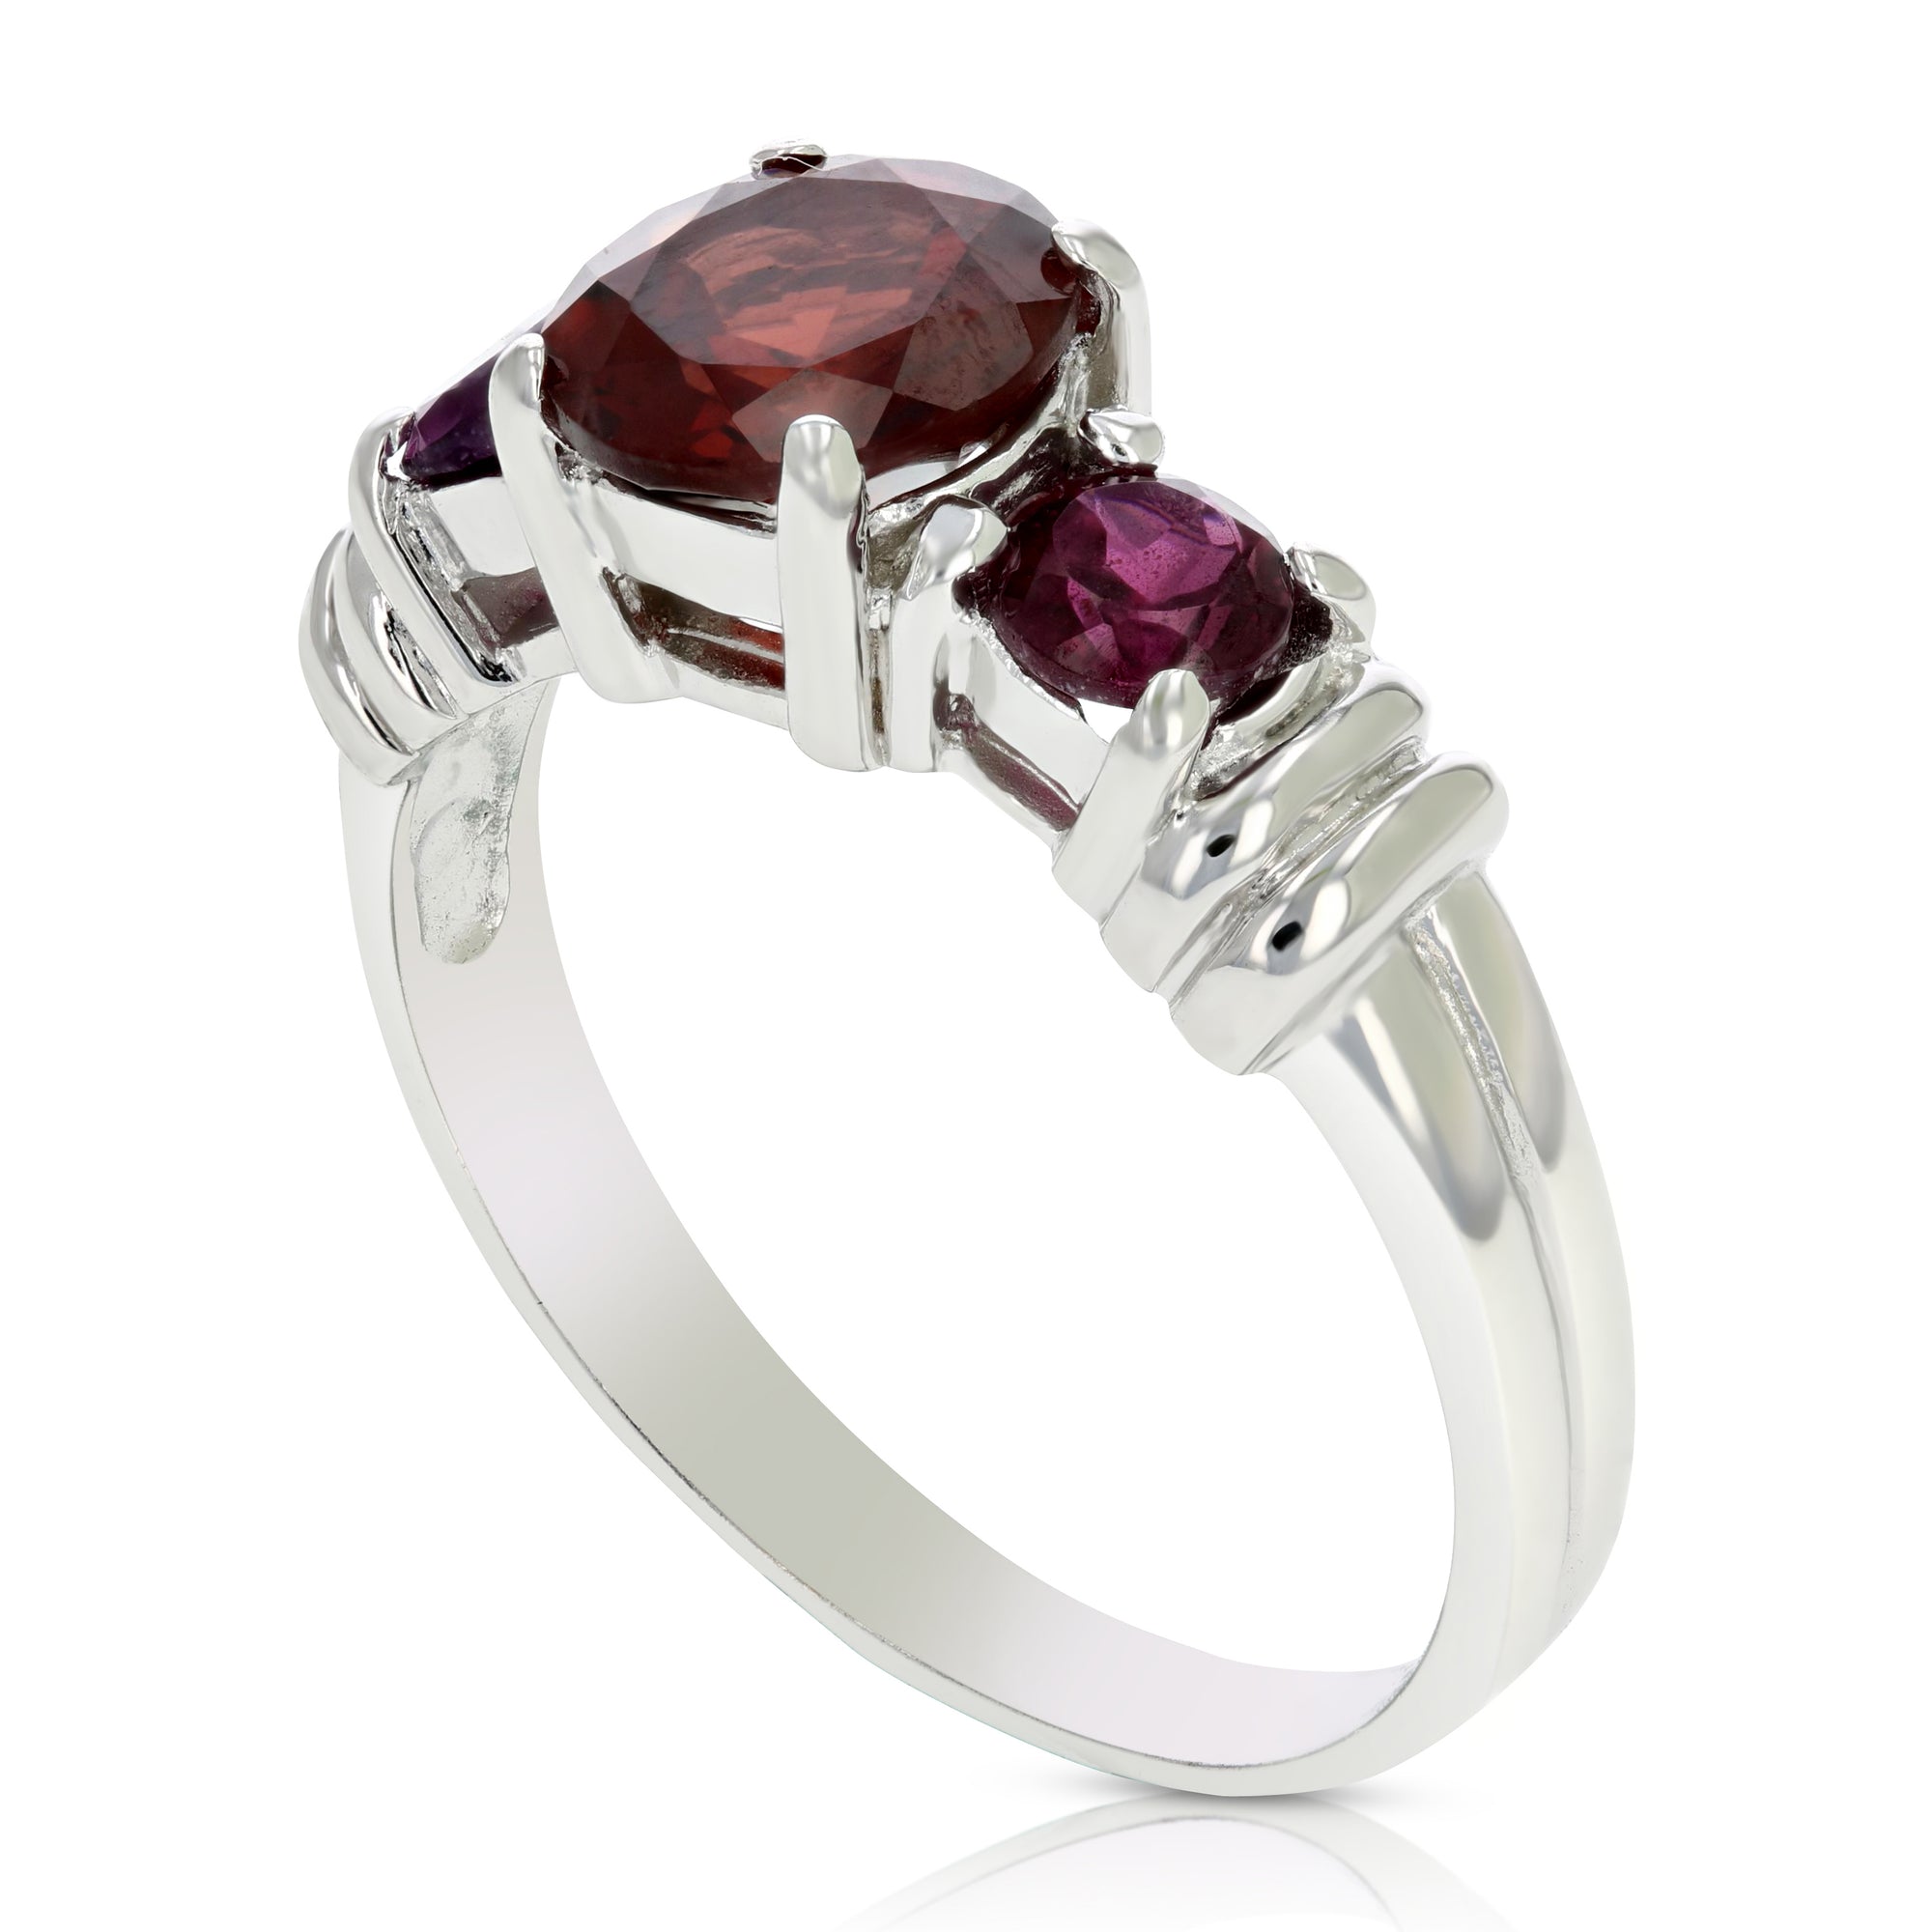 1.20 cttw 3 Stone Garnet Ring in .925 Sterling Silver with Rhodium Plating Round